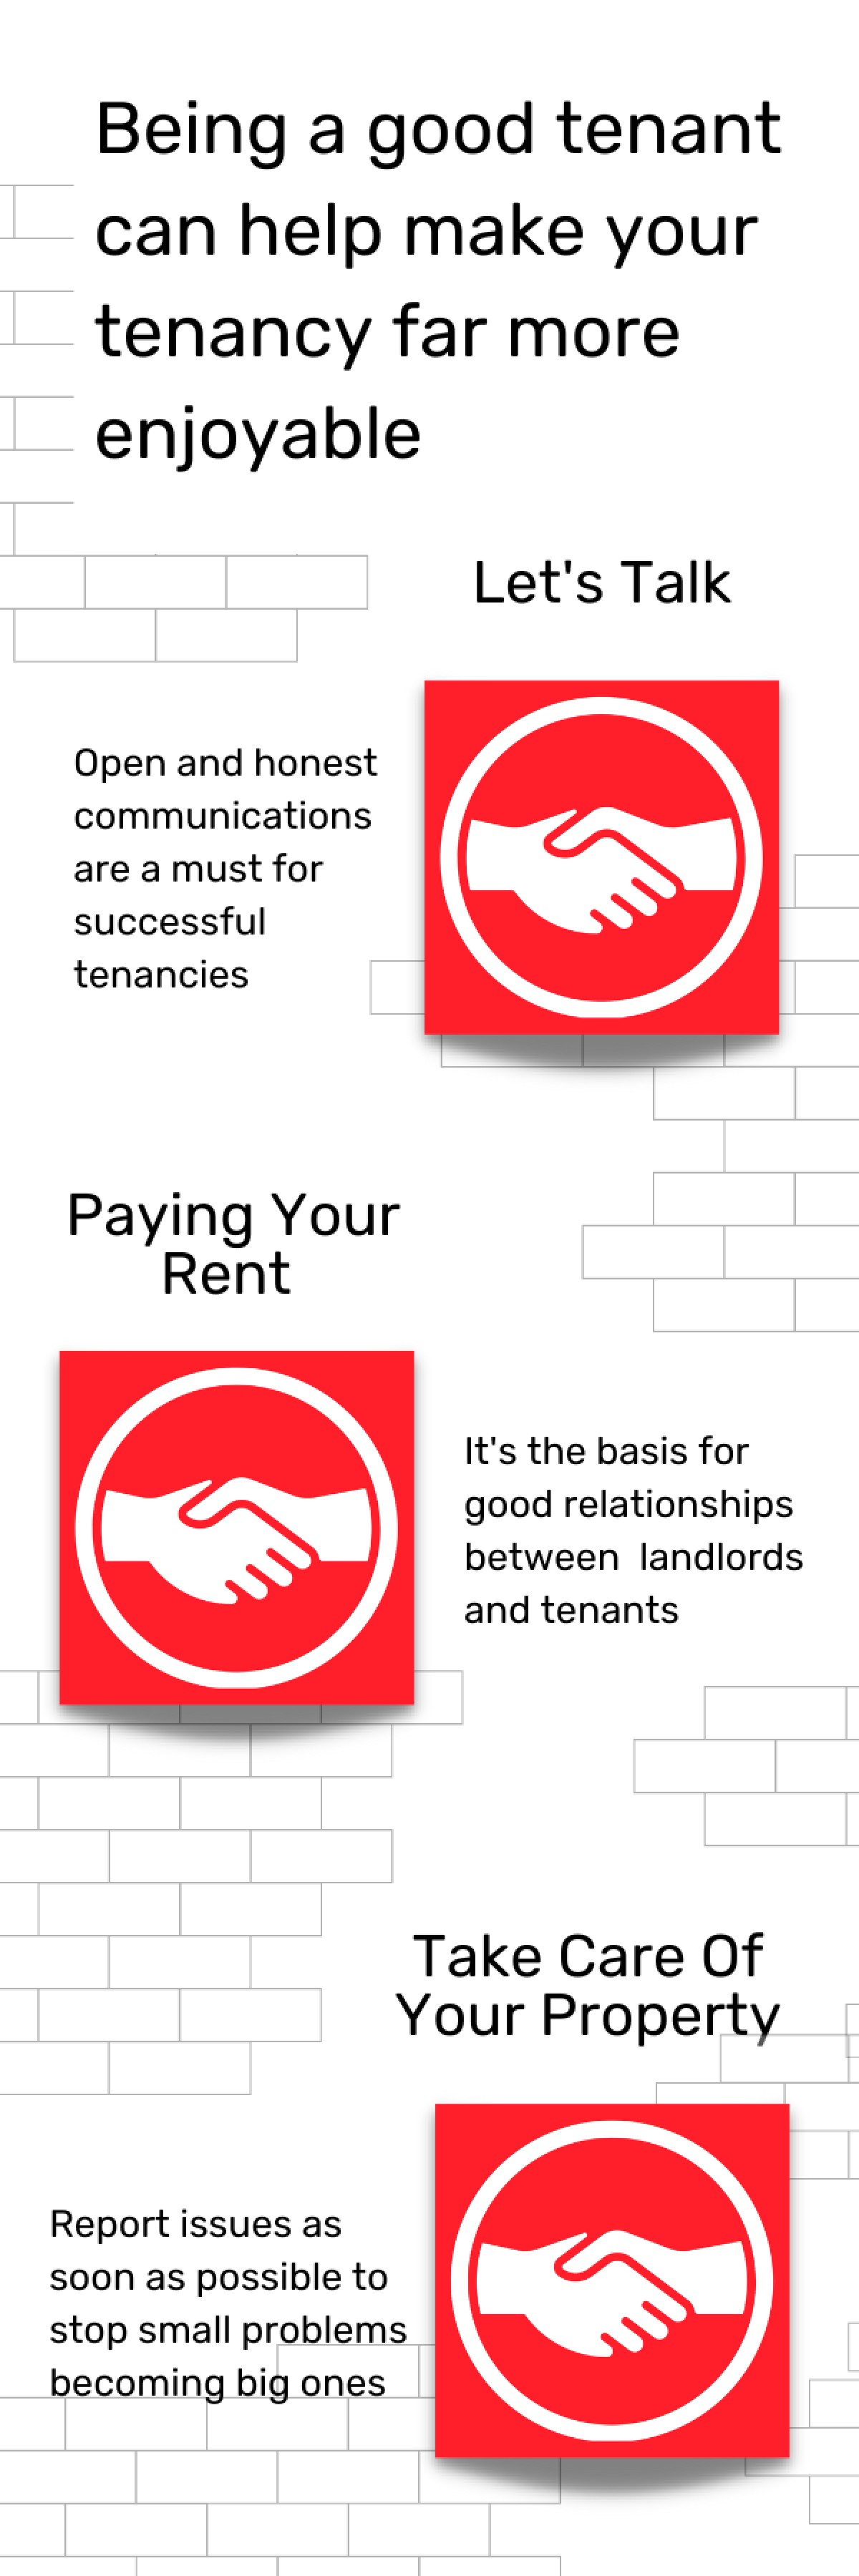 Tips for tenants